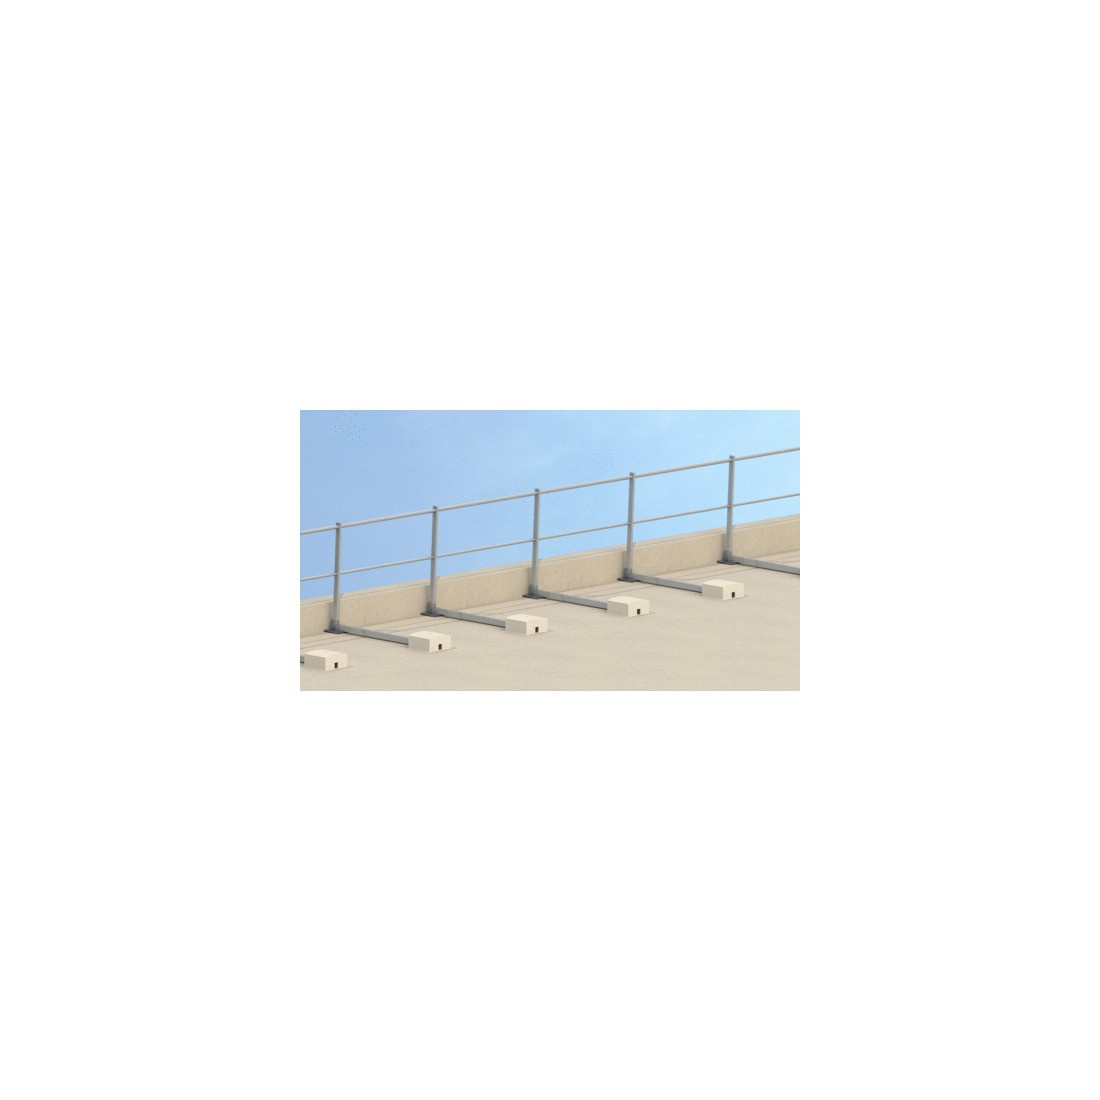 SELF-SUPPORTING STRAIGHT GUARDRAIL